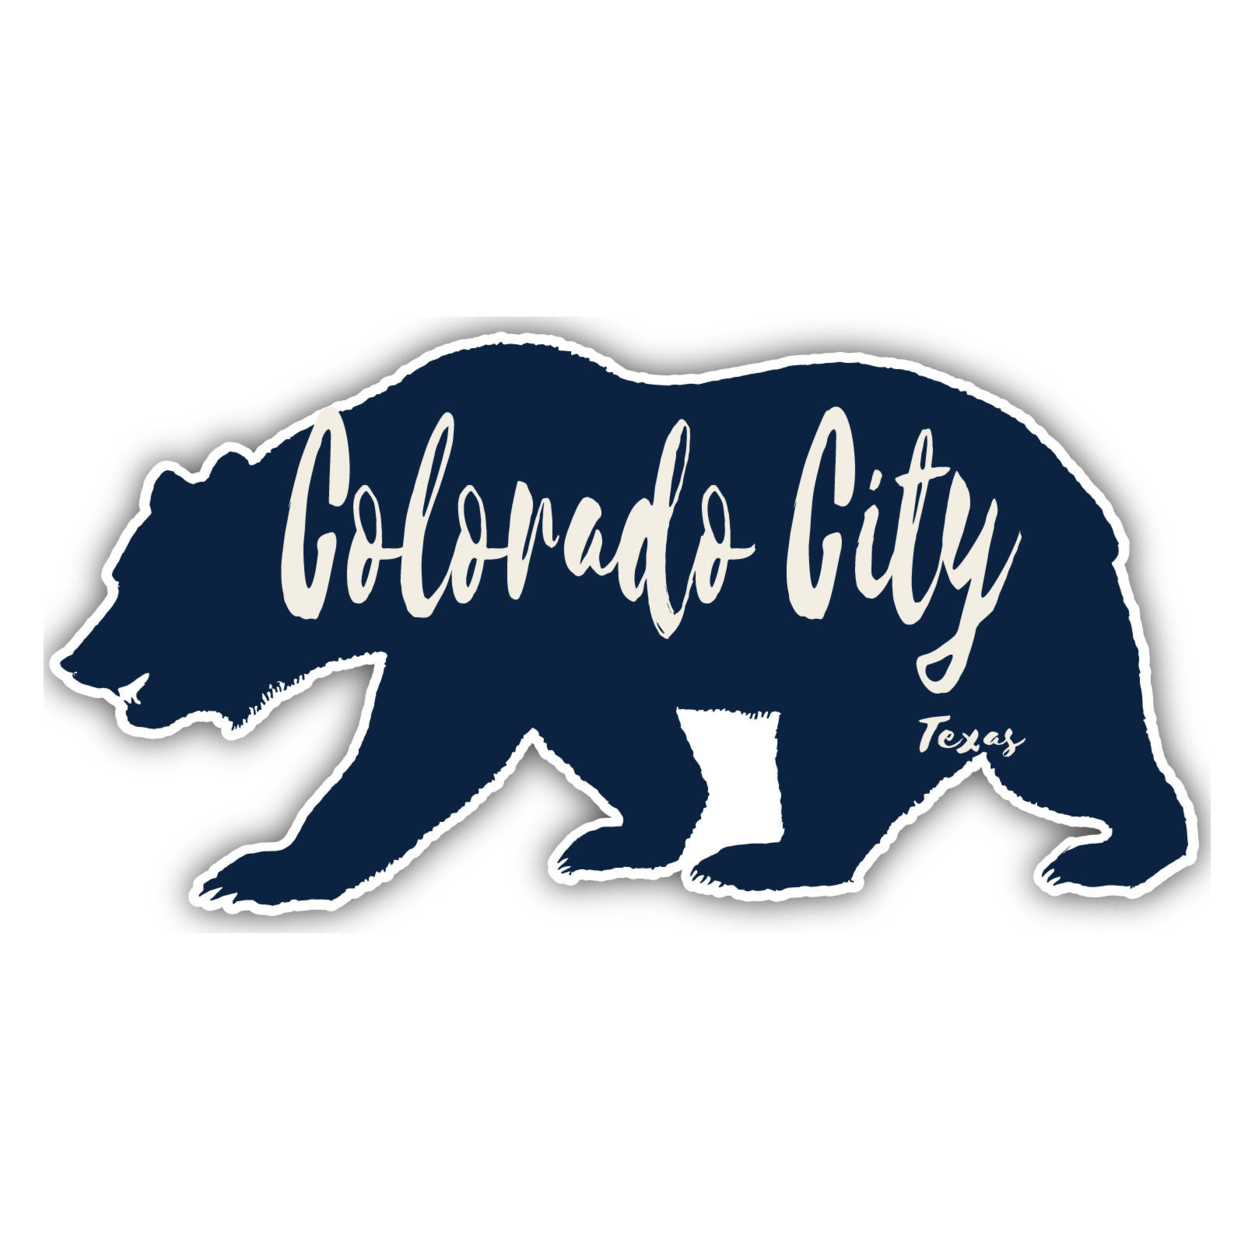 Colorado City Texas Souvenir Decorative Stickers (Choose Theme And Size) - Single Unit, 6-Inch, Great Outdoors